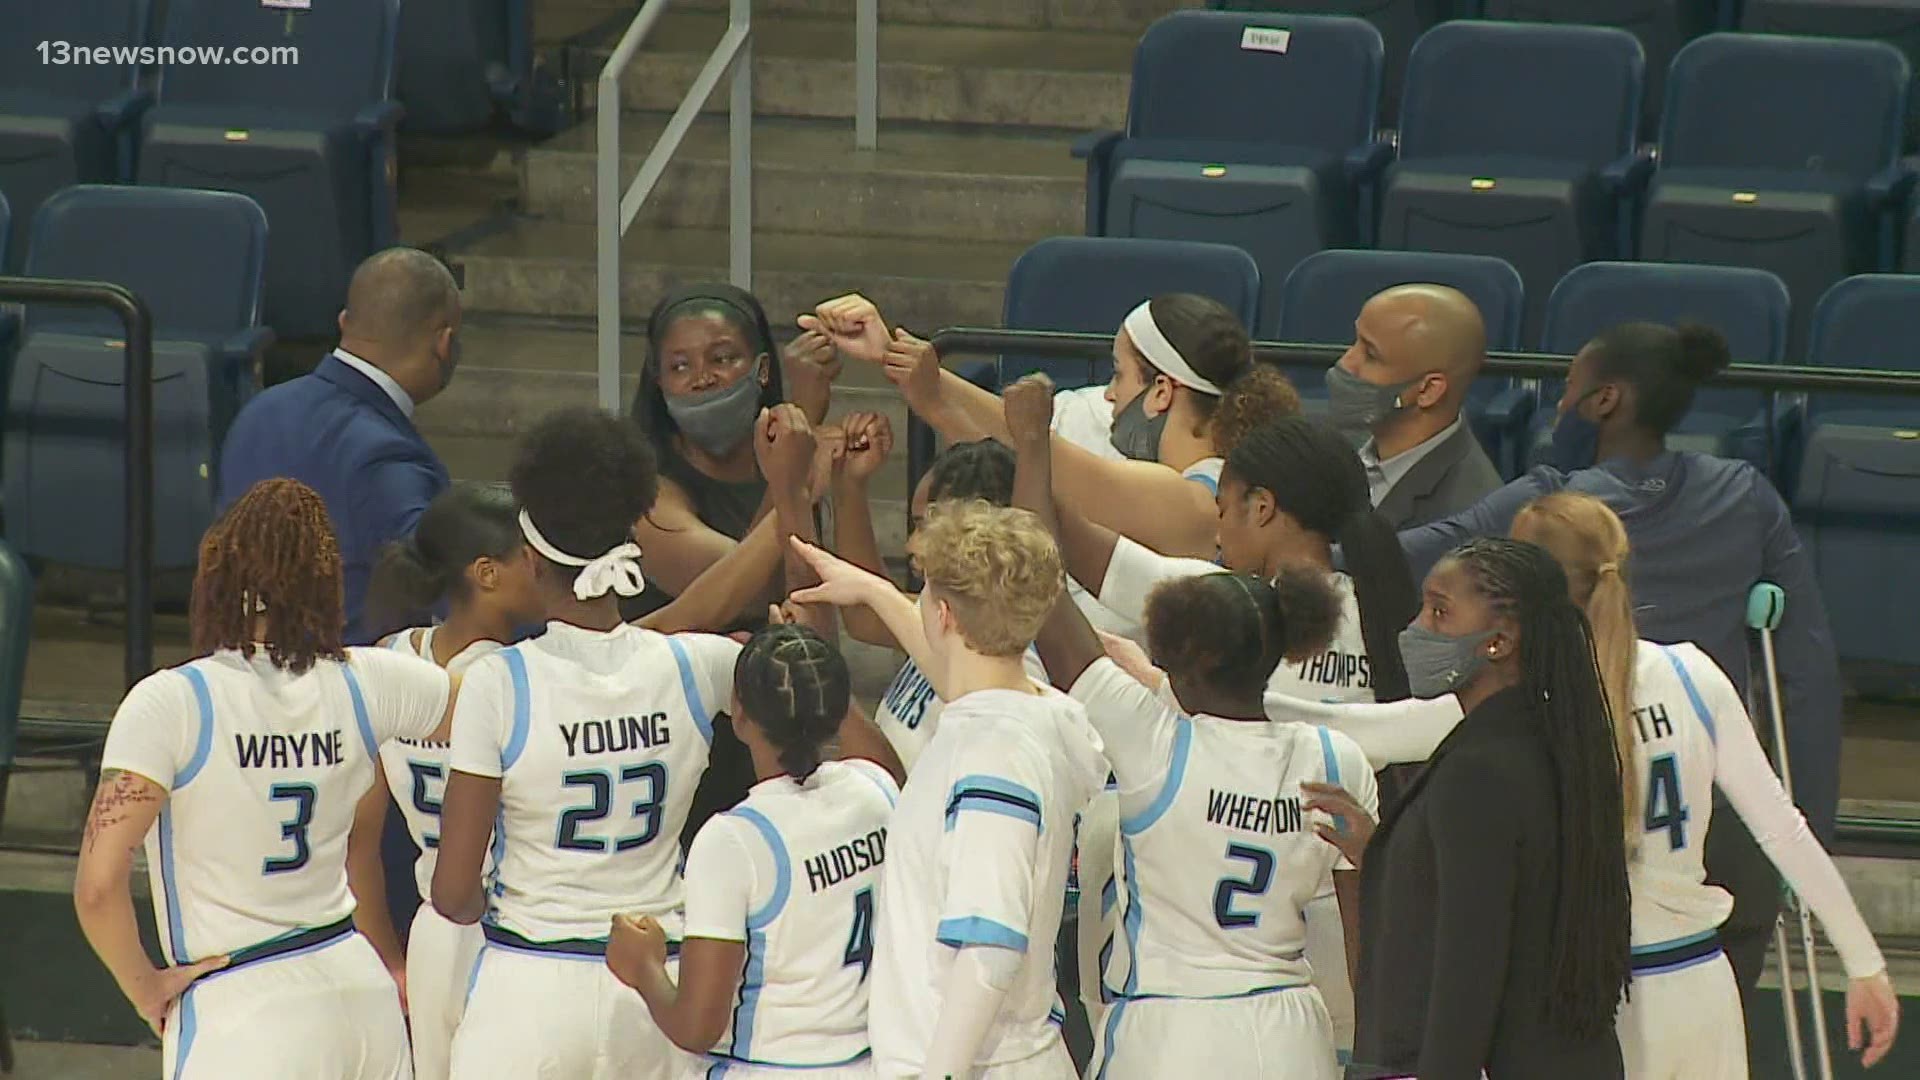 The Monarchs women's team got their new coach her first win by beating William and Mary 70-47.